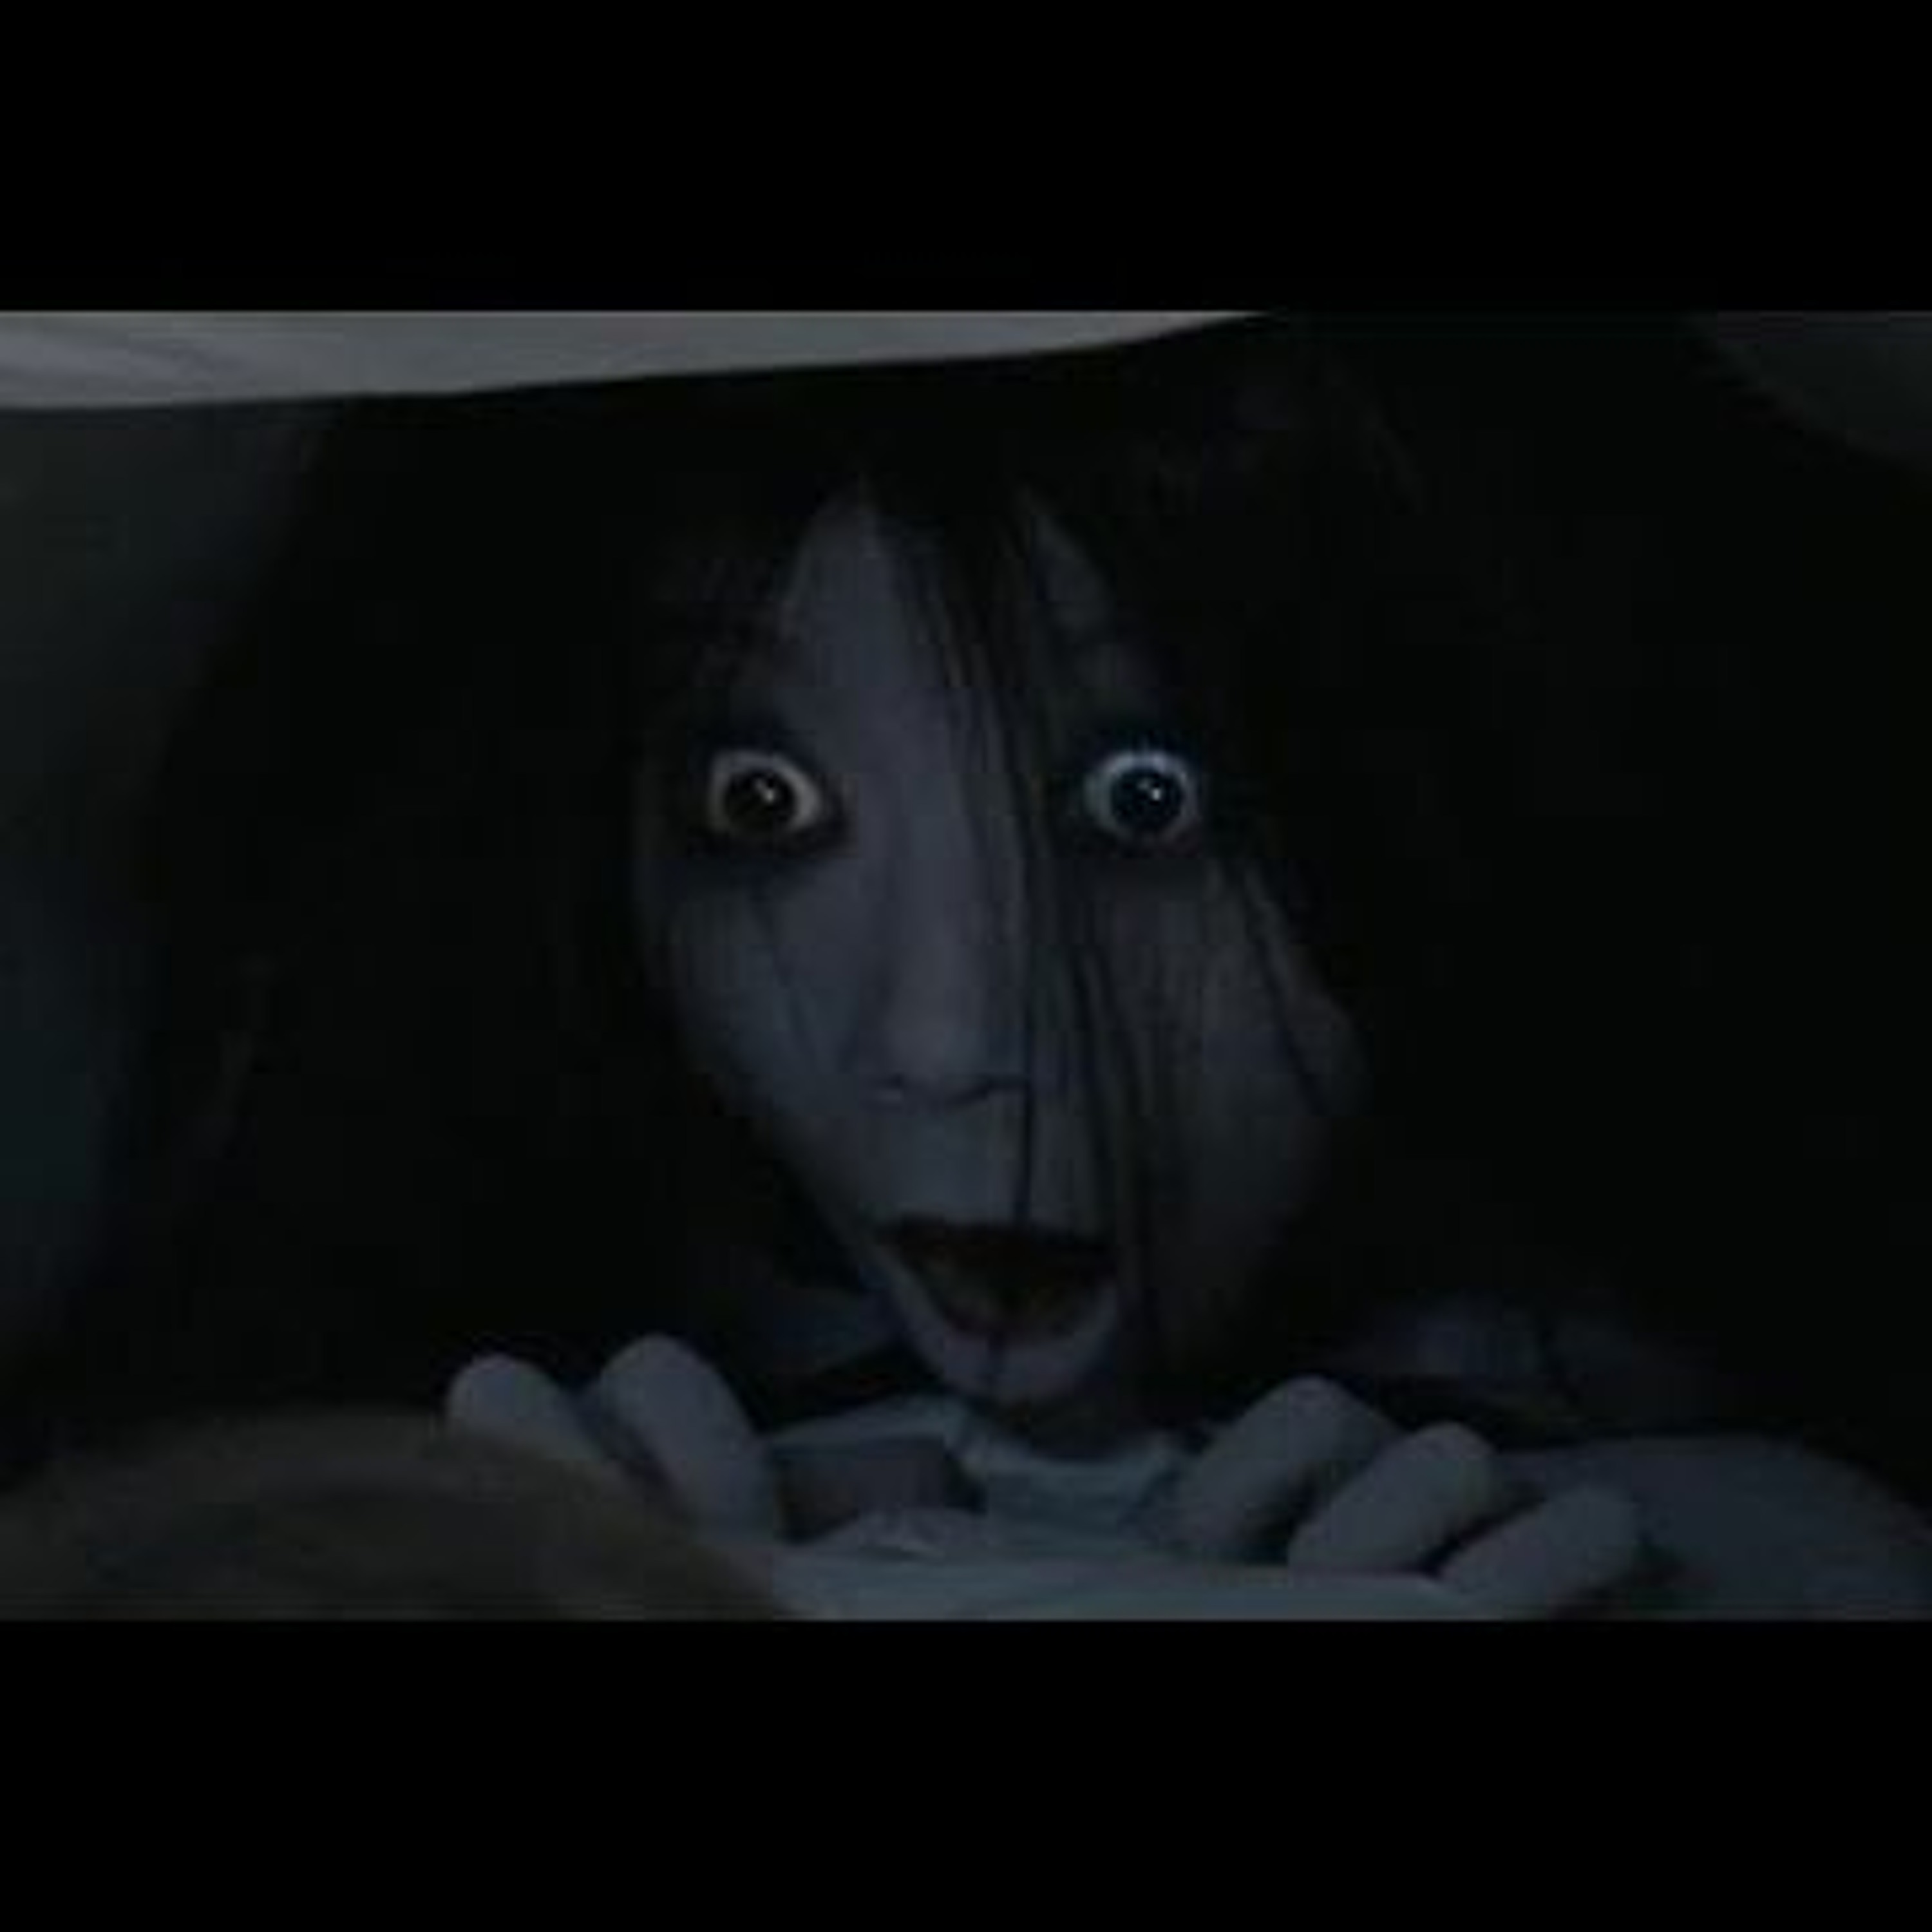 Episode 43: The Grudge of Ju-on